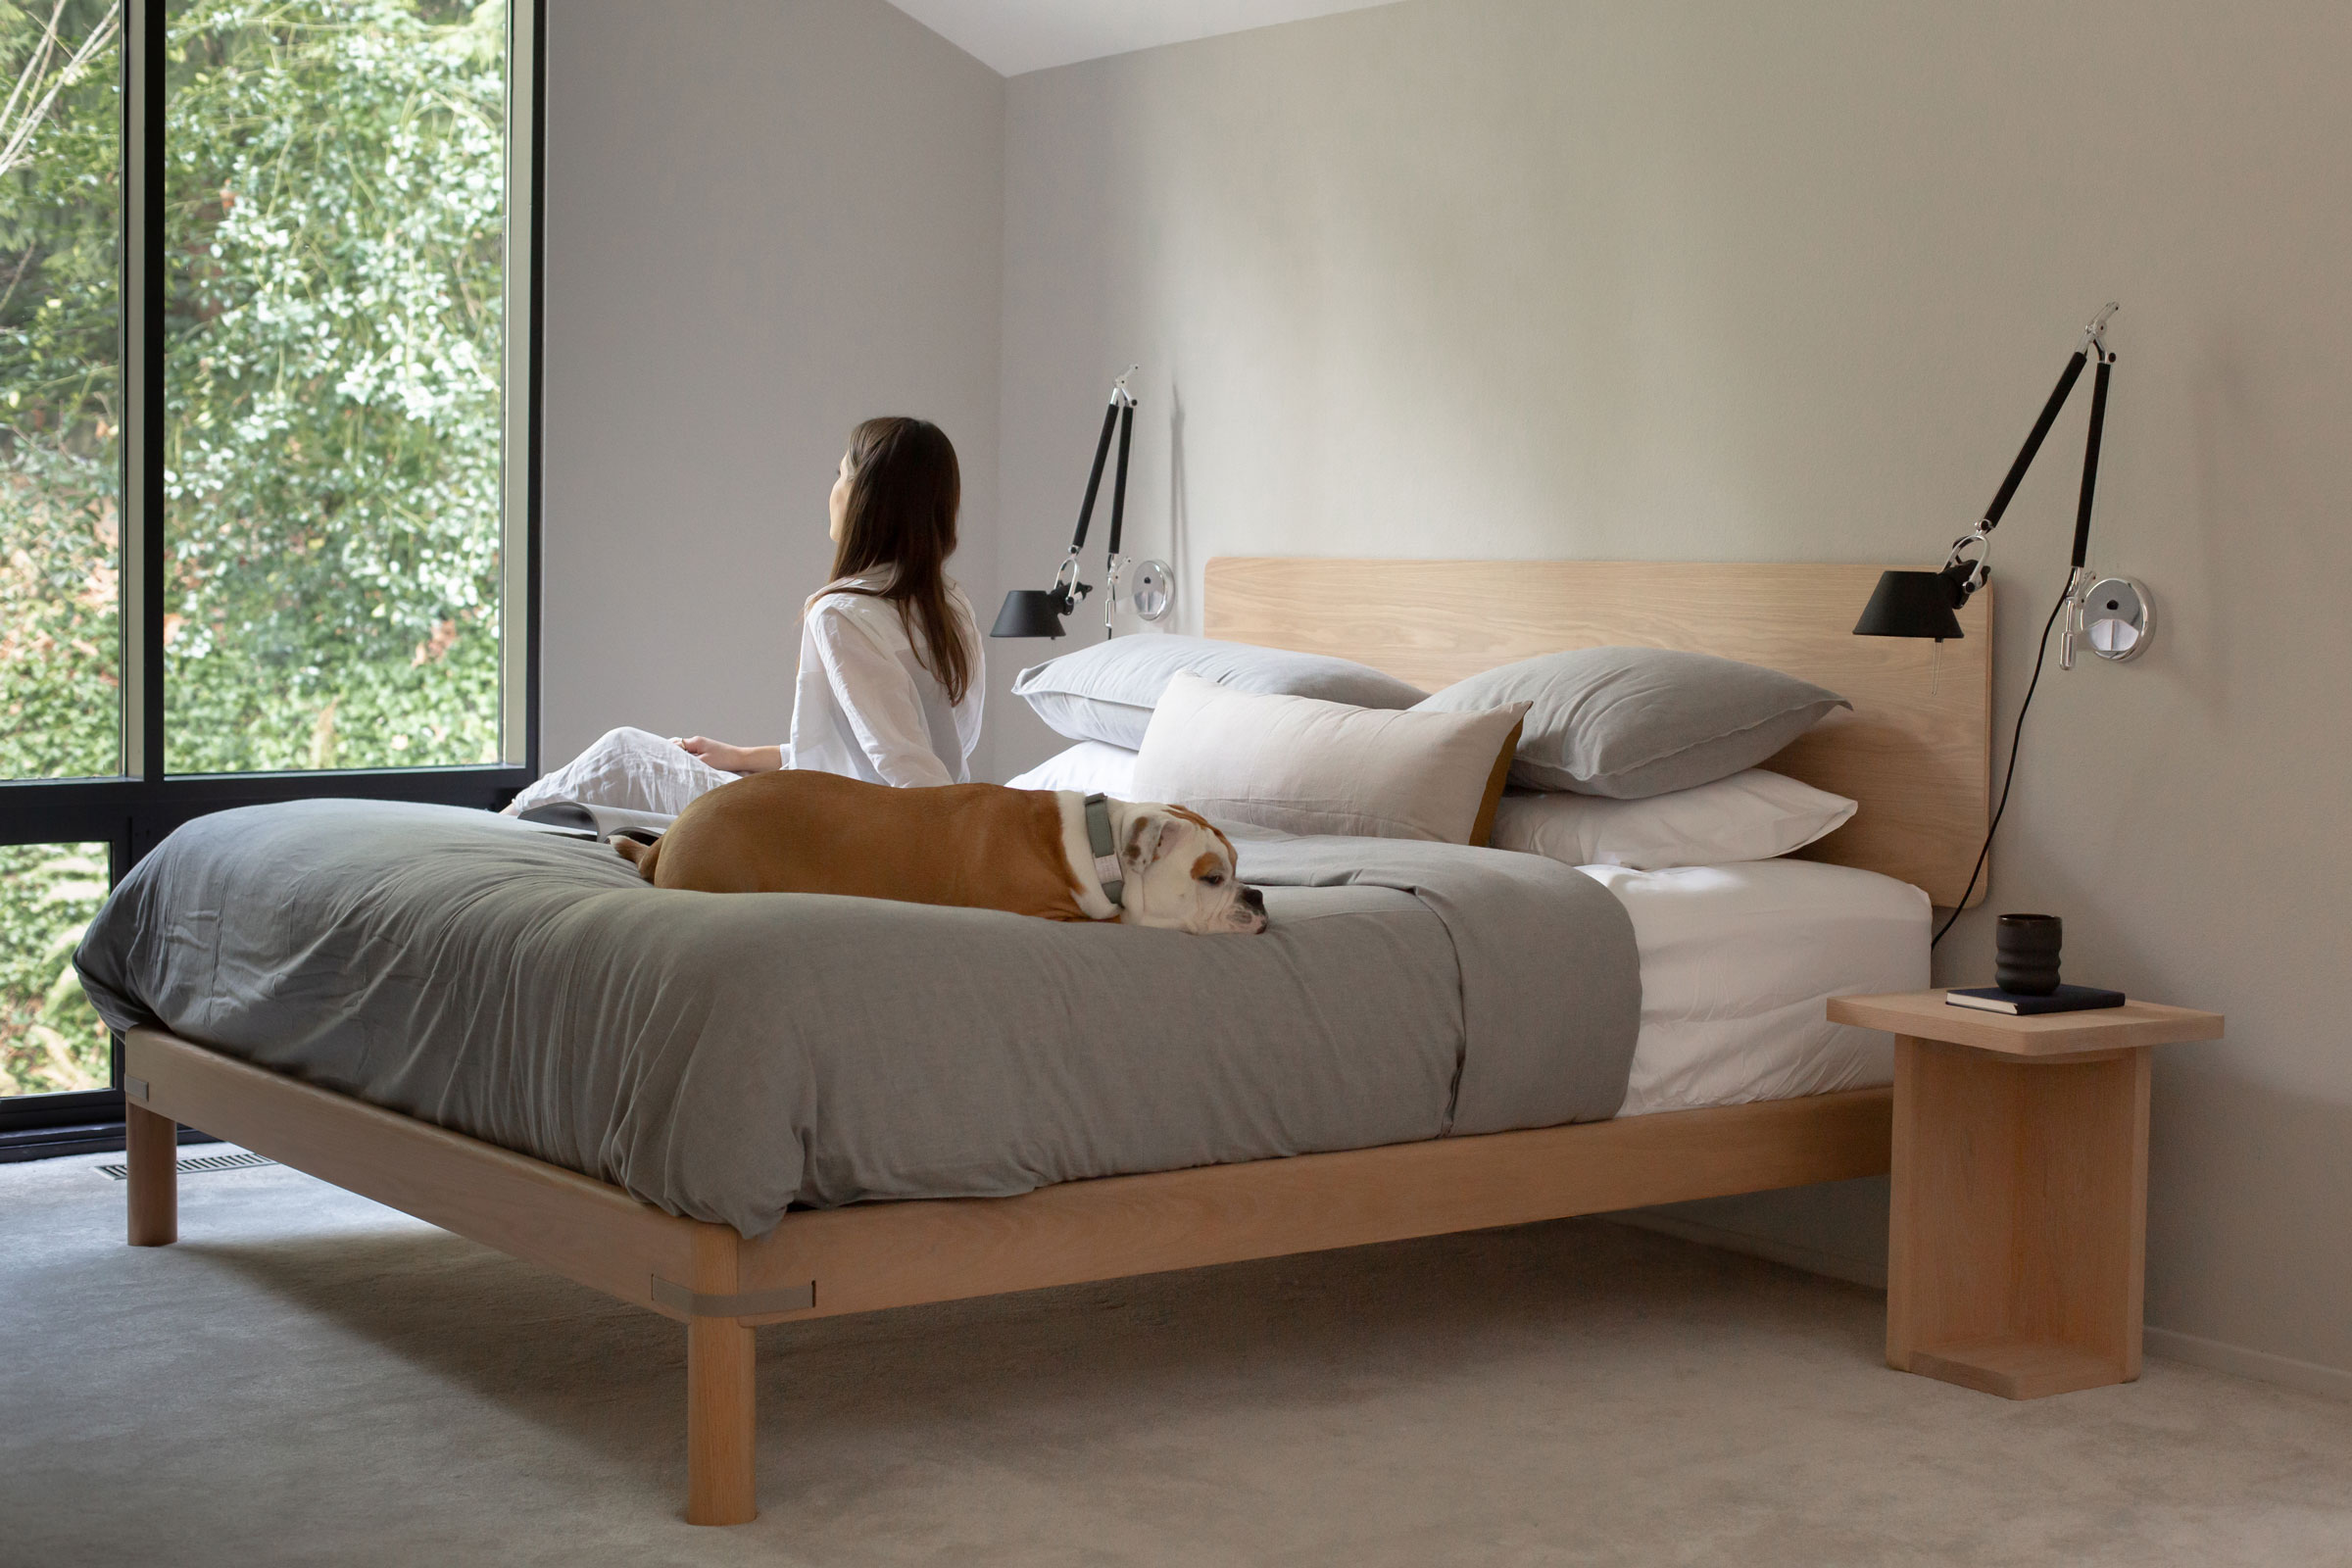 sustainable interior design products keeps bed